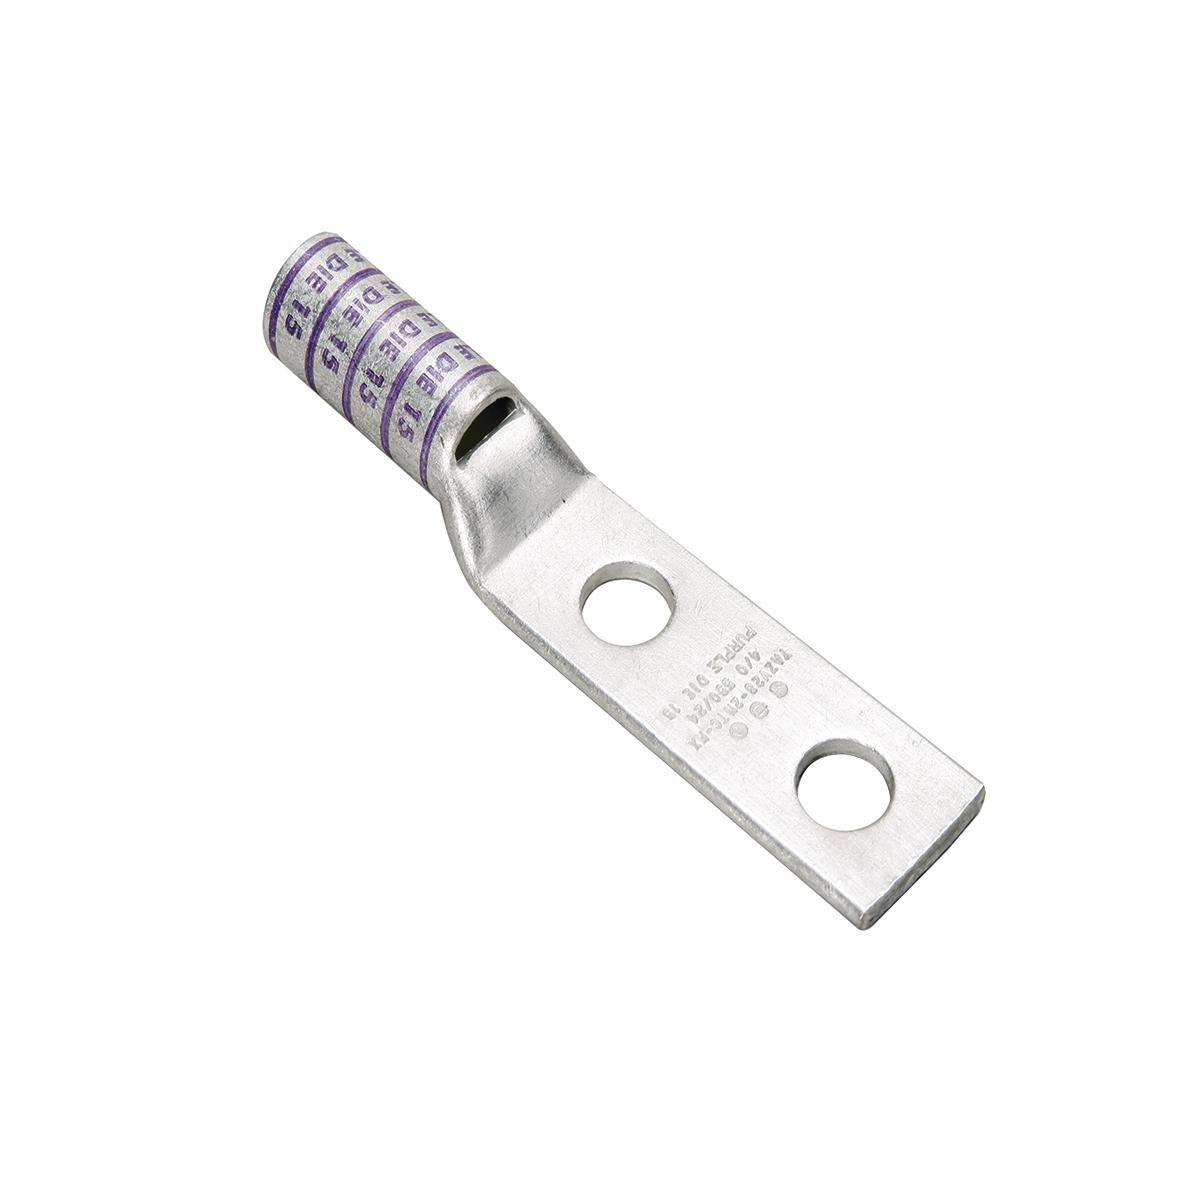 Hubbell YAZ2C2TC38E2 Copper Compression Lug, 2 Hole w/ Inspection Window, 2 AWG, 3/8" Stud, 3/4" Stud Hole Spacing, Long Barrel, Tin Plated.  ; Features: UL Listed 90 DEG C, 600 V - 35 KV, 45 DEG And 90 DEG Angles Are Available, With Inspection Window, Finish: Electro-Tin Pla